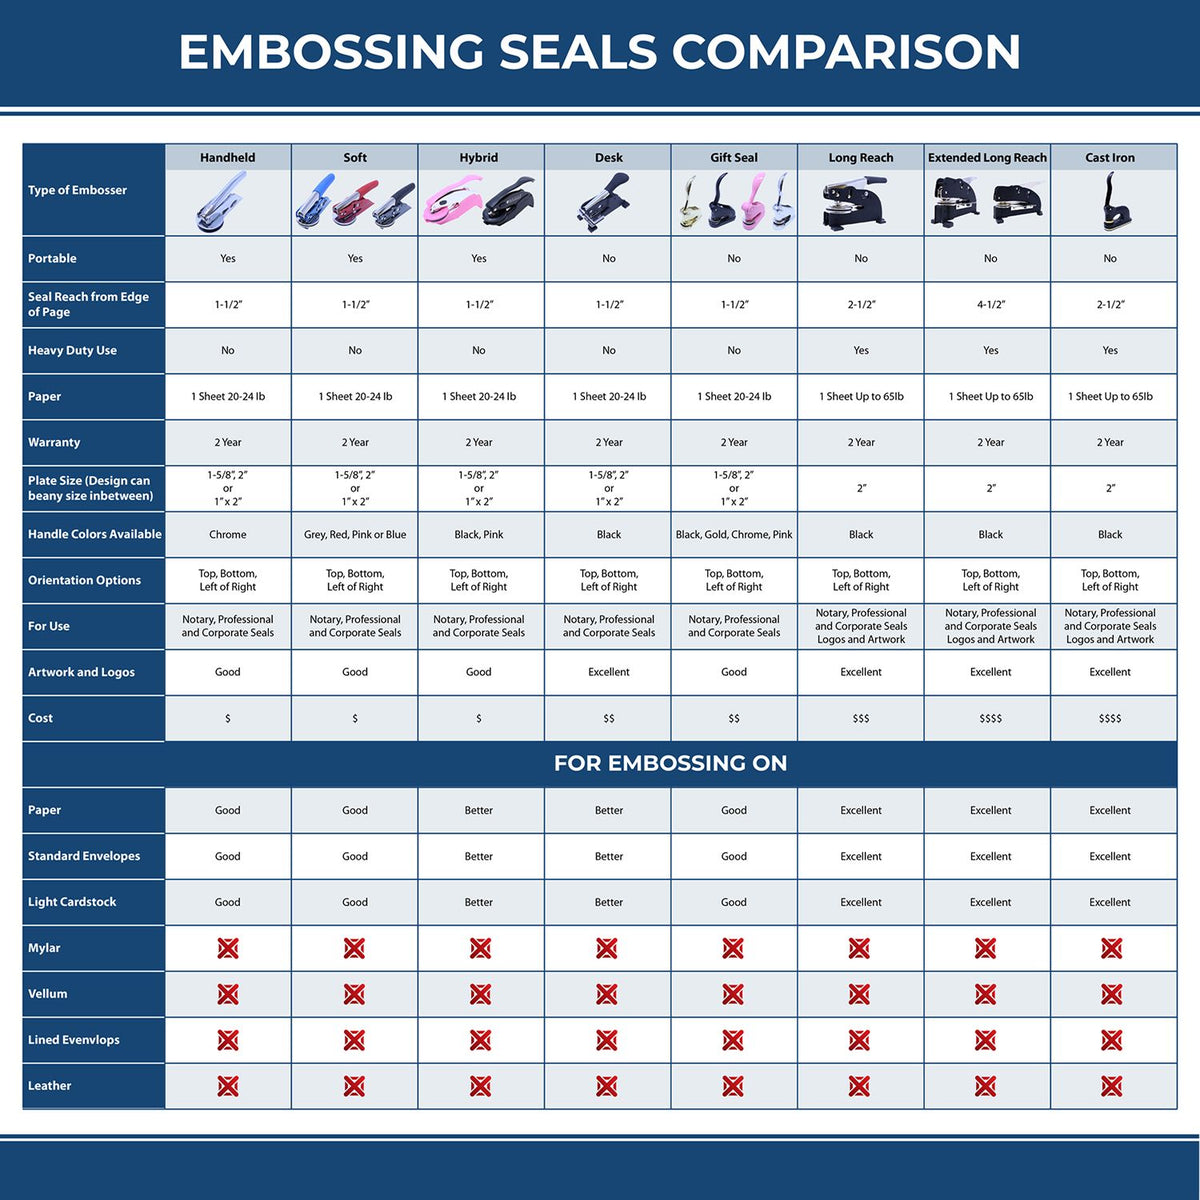 A comparison chart for the different types of mount models available for the District of Columbia Soft Land Surveyor Embossing Seal.